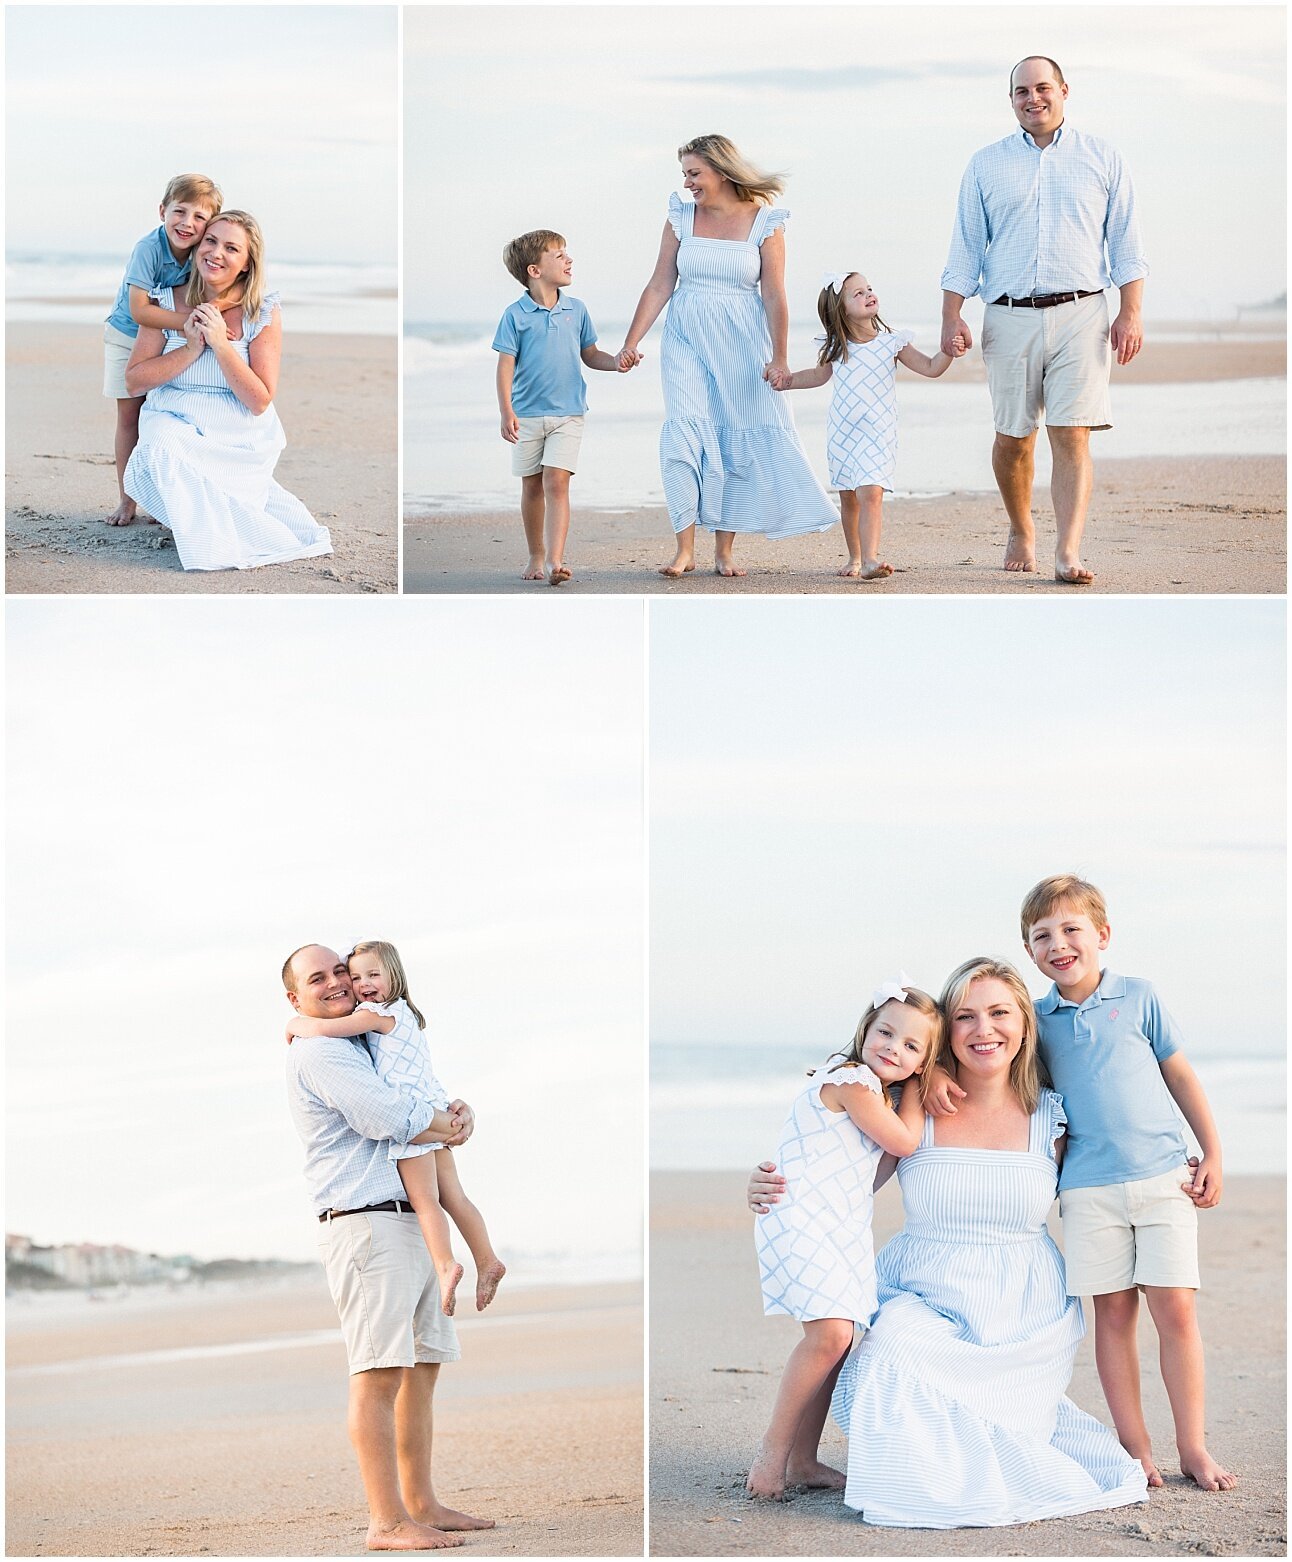 kids and parents outfit coordination and posing ideas at the beach - Jacksonville family photographer